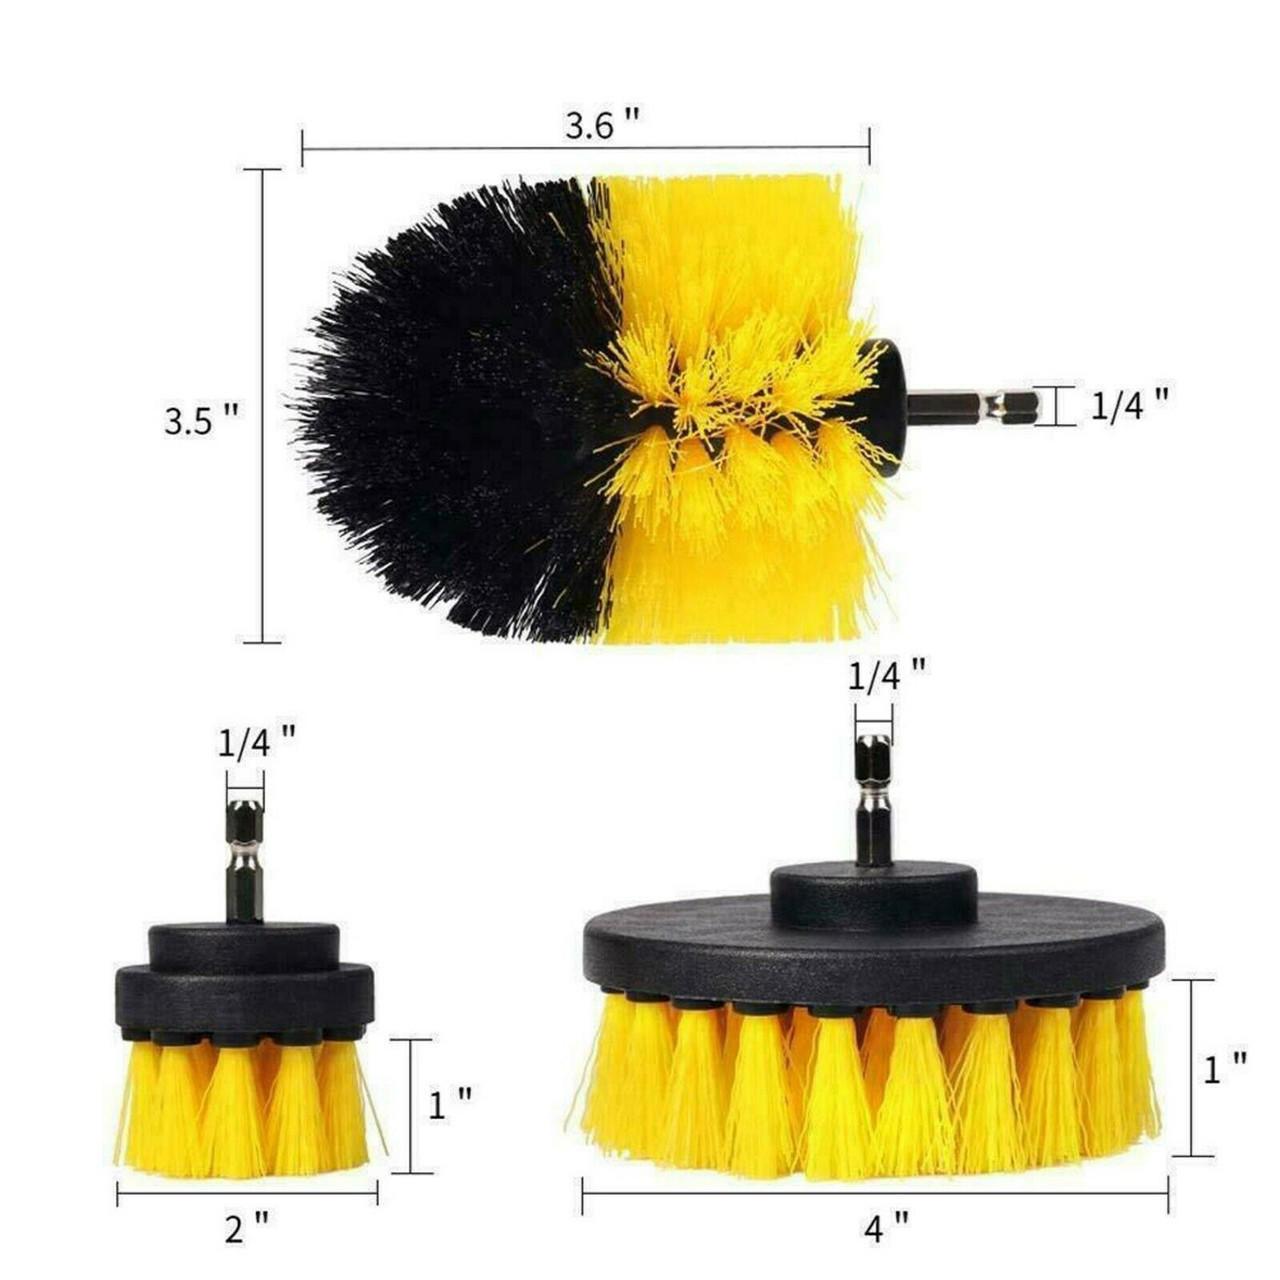 https://cdn11.bigcommerce.com/s-zrh8tkpr8d/images/stencil/1280x1280/products/9941/32533/4pcs-home-drill-brush-attachment-power-scrubber-car-cleaning-kit-combo-scrub-tub__59730.1665667693.jpg?c=2